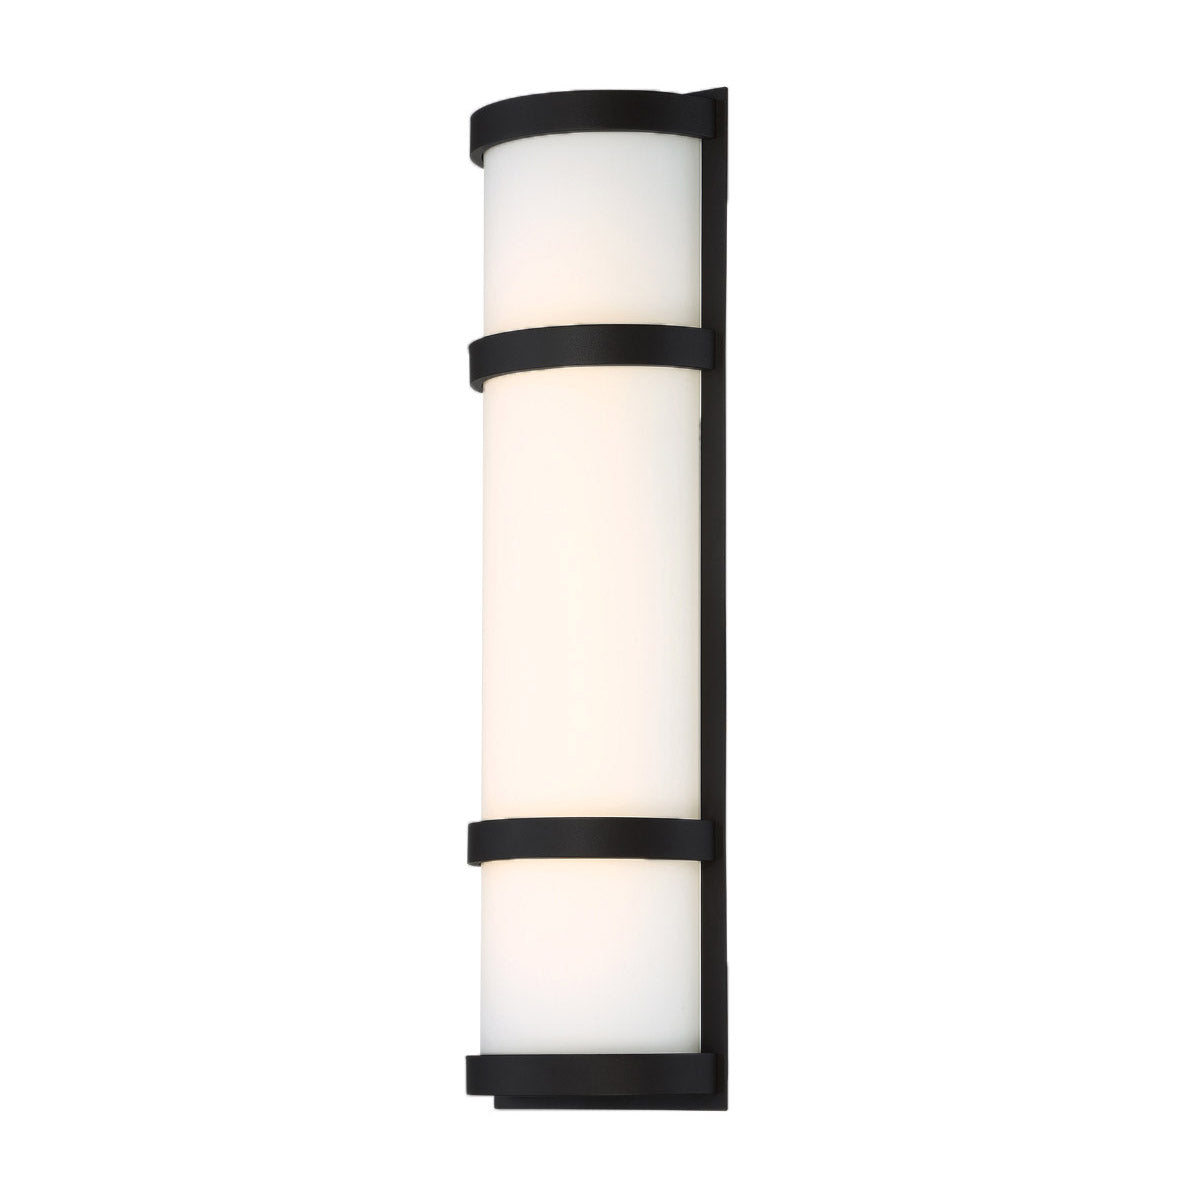 Latitude 20 in. LED Outdoor Wall Sconce 3000K